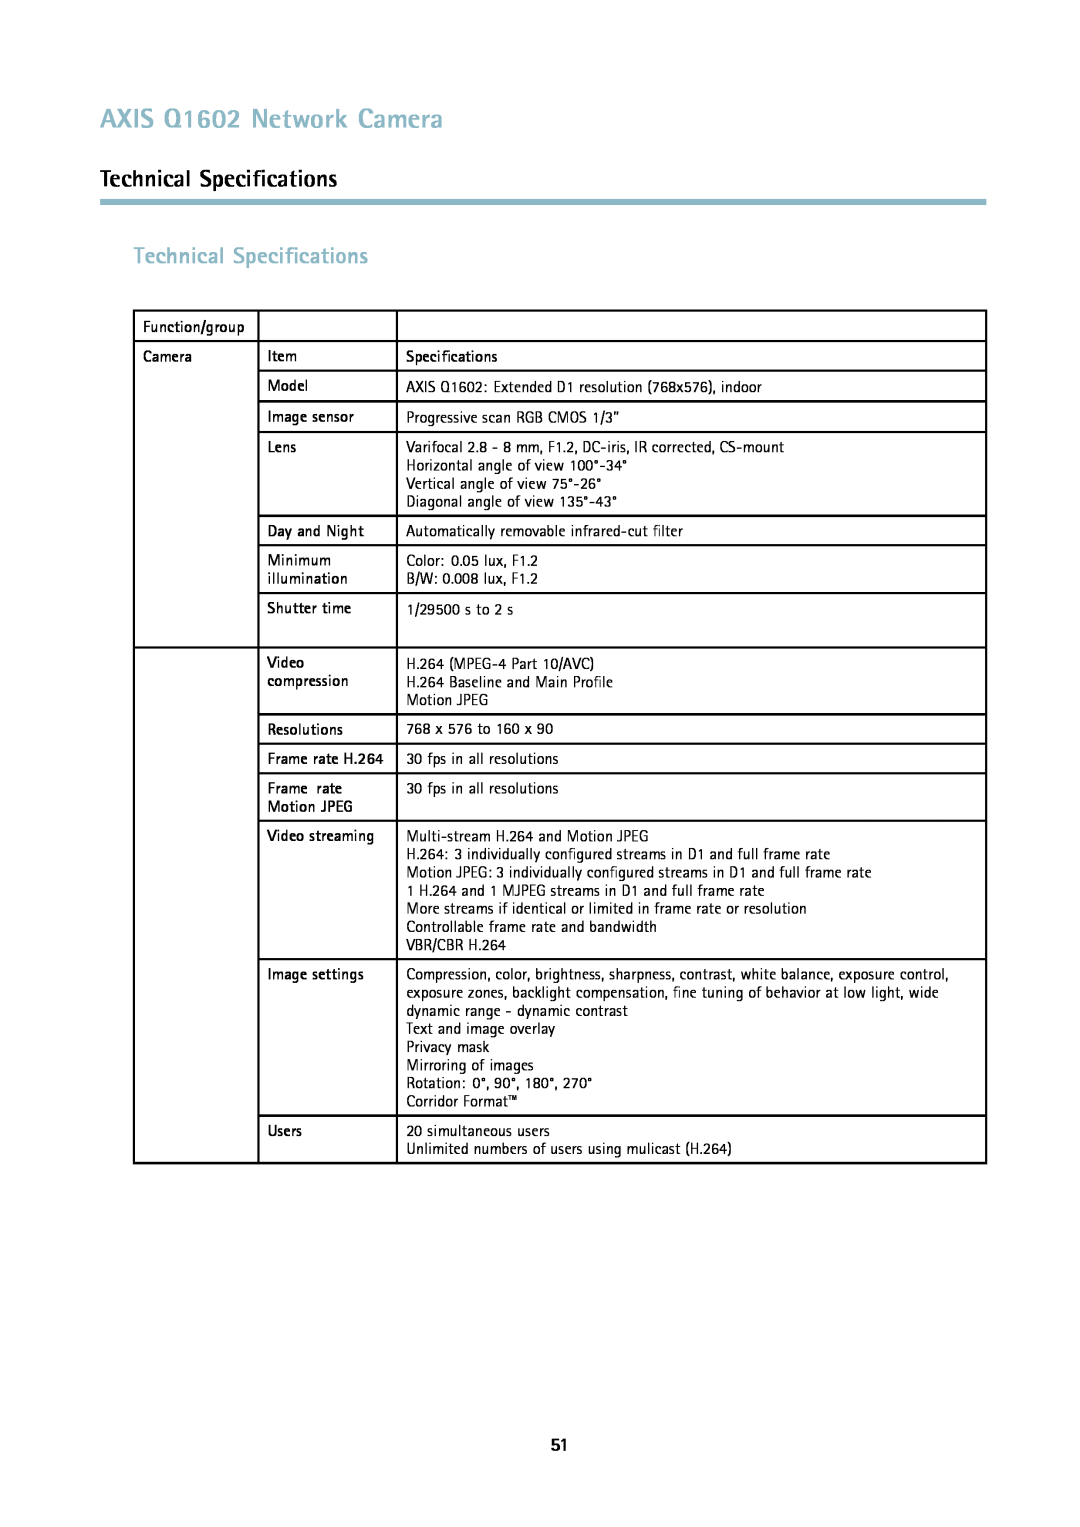 Axis Communications Q1602 Technical Speciﬁcations, Function/group, Camera, Model, Image sensor, Lens, Day and Night, Video 